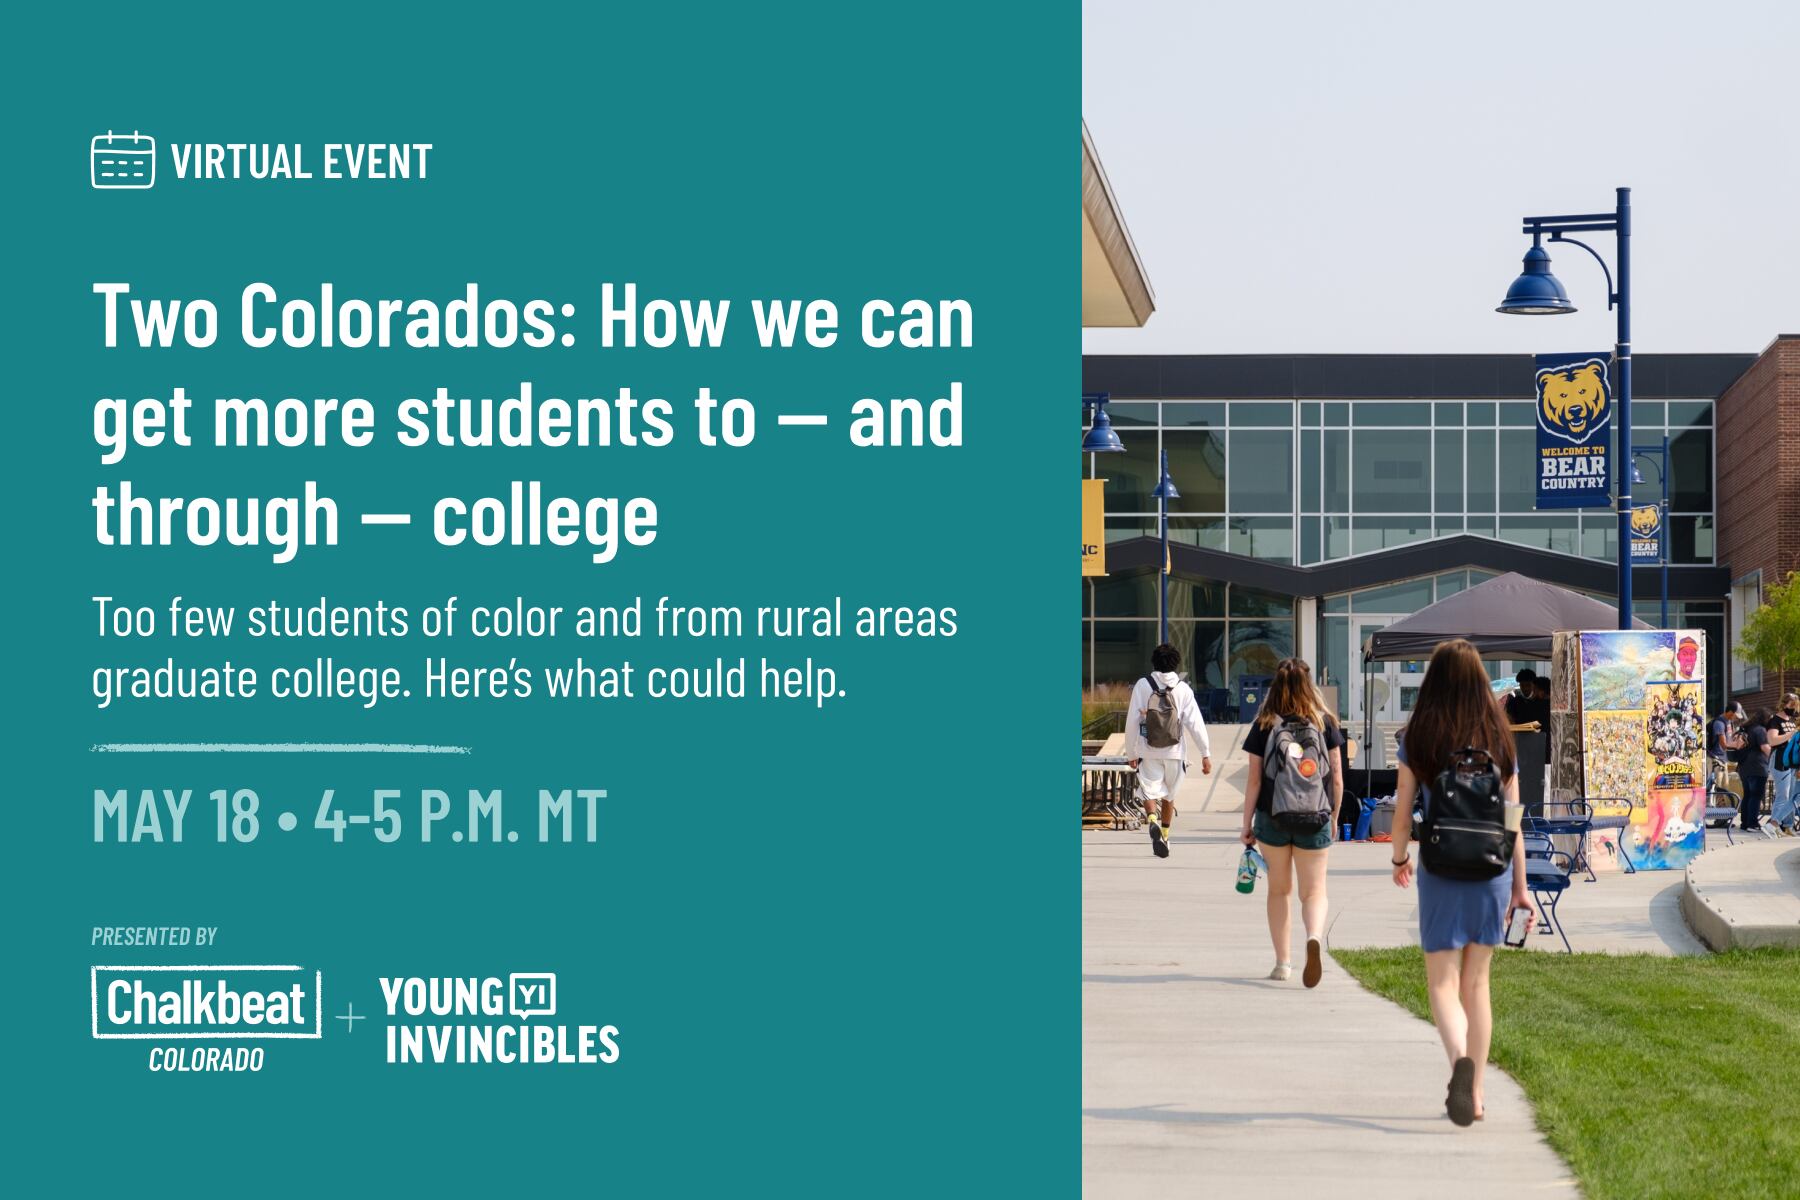 The title of an upcoming event, “Two Colorados: How we can get more students to — and through — college” is displayed against a blue background. Next to the words, a photo displays a person walking on a college campus.